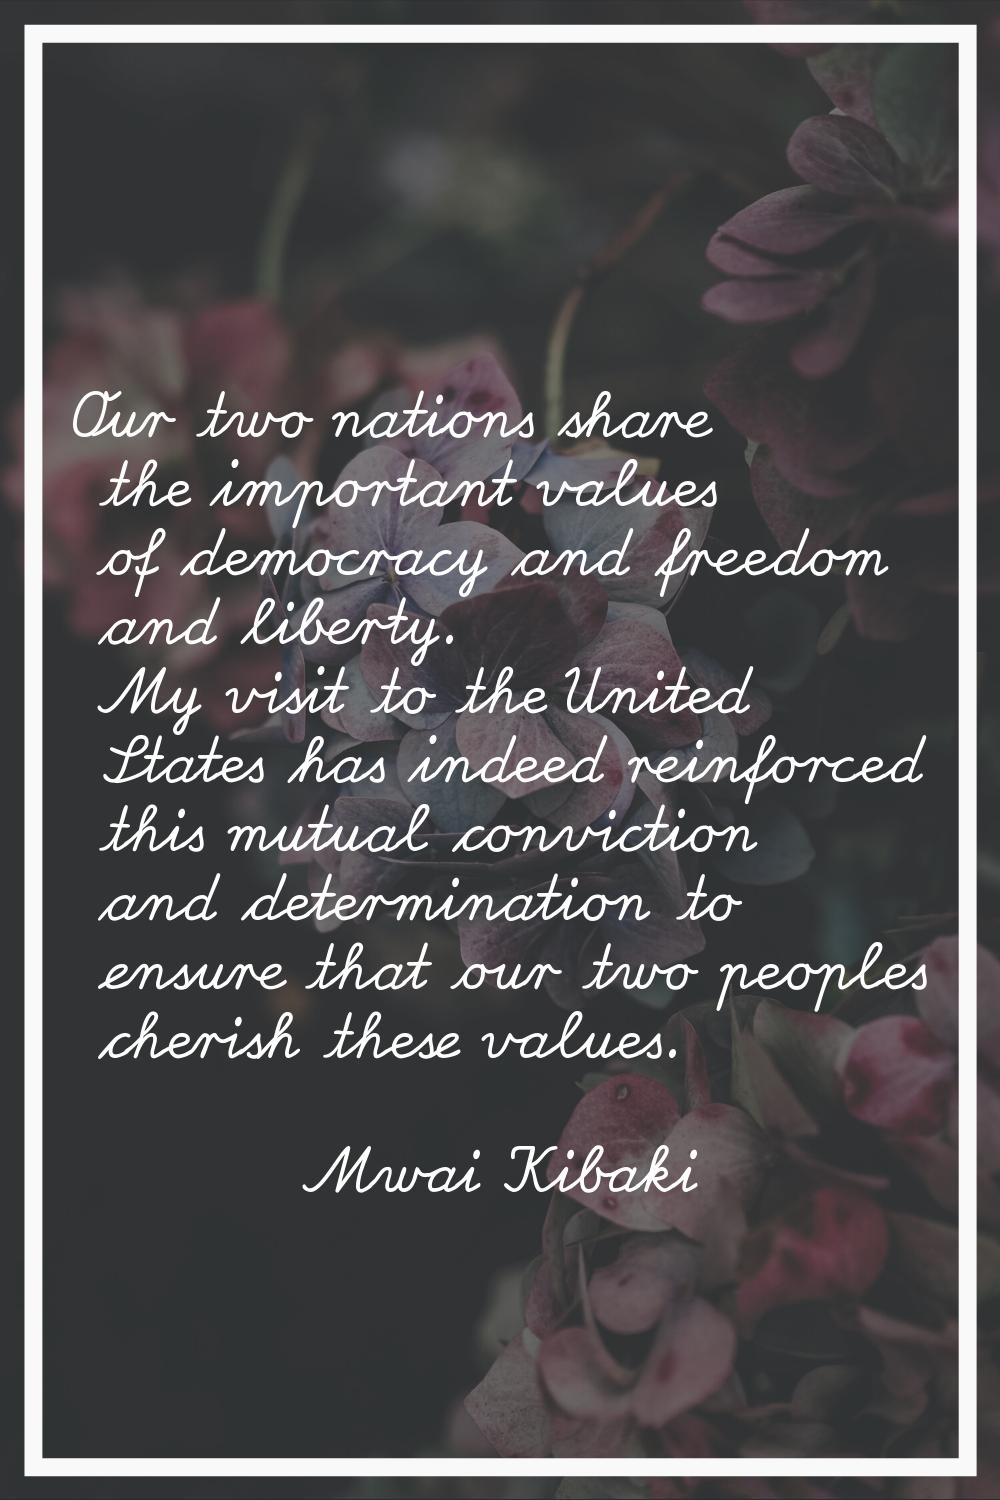 Our two nations share the important values of democracy and freedom and liberty. My visit to the Un